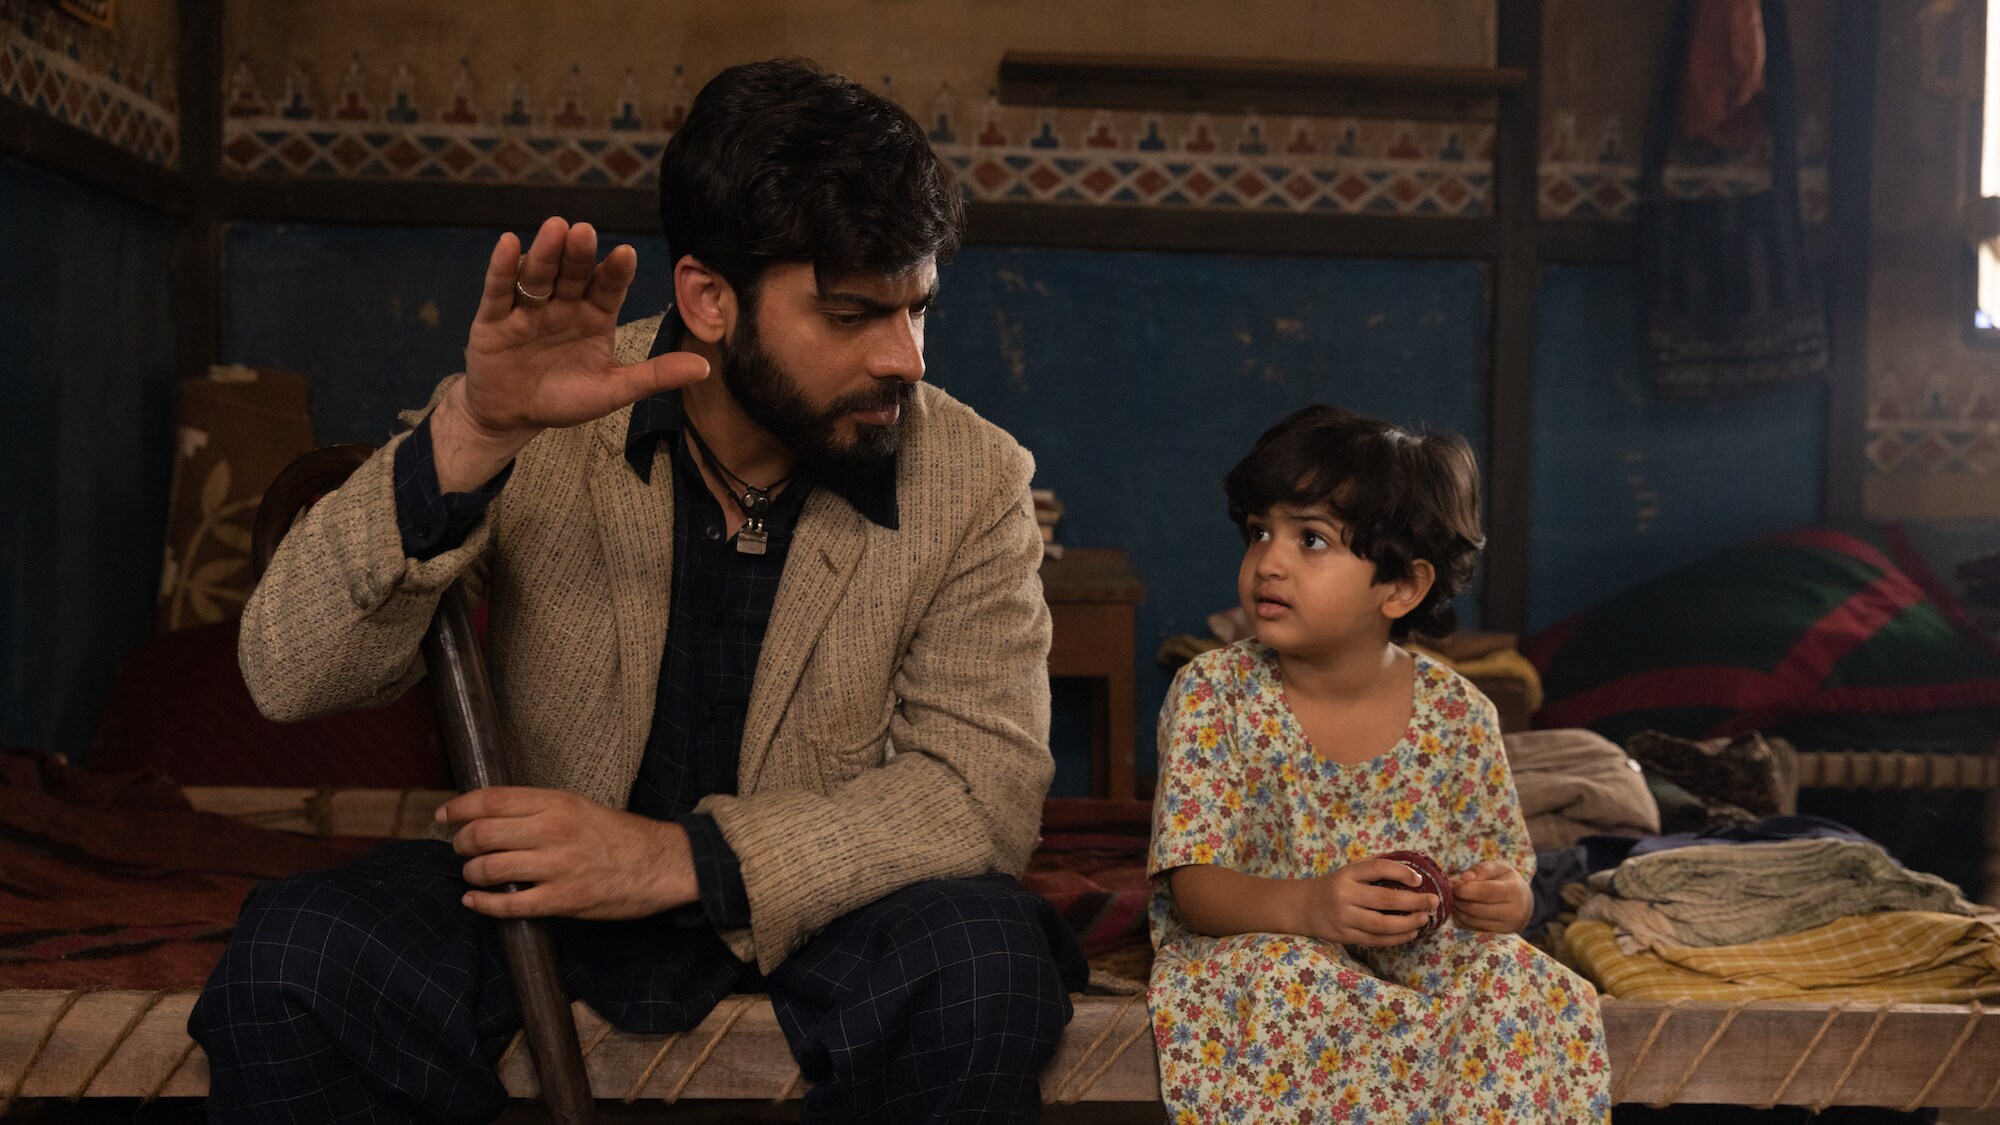 (L-R): Fawad Kahn as Hasan and Zion Usman as Young Sana in Marvel Studios' MS. MARVEL, exclusively on Disney+. Photo by Patrick Brown. ©Marvel Studios 2022. All Rights Reserved.